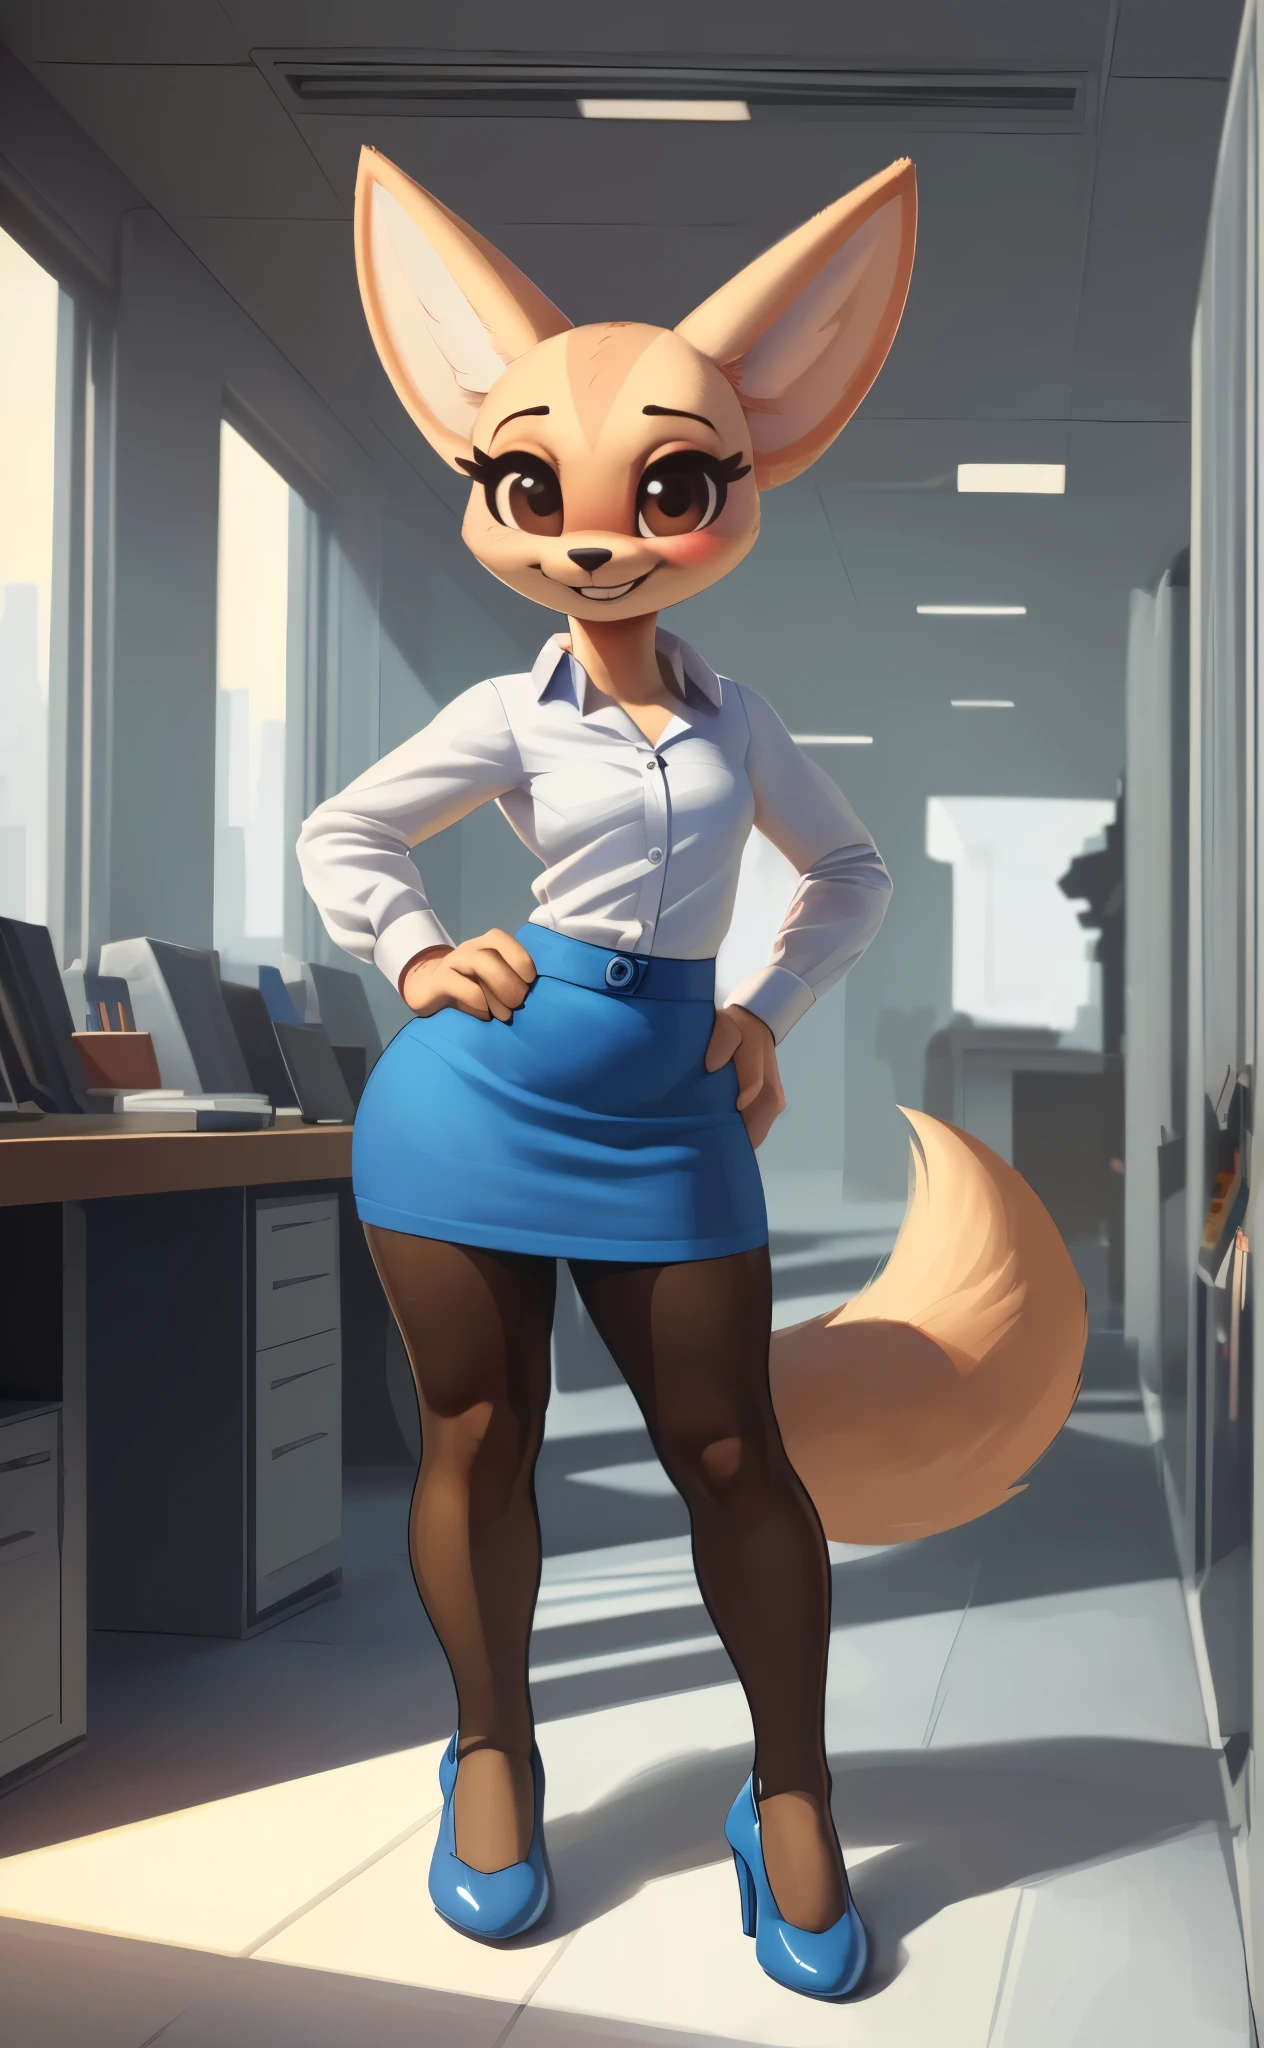 [fenneko], [aggretsuko], [Uploaded to e621.net; (Pixelsketcher), (wamudraws)], ((masterpiece)), ((HD)), ((high res)), ((solo portrait)), ((front view)), ((feet visible)), ((furry; anthro)), ((detailed fur)), ((detailed shading)), ((beautiful render art)), ((intricate details)), {anthro; (slim figure), beige fur, black nose, cute brown eyes, (long eyelashes), (fluffy tail), (curvy hips), (beautiful legs), (beautiful feet), (blushing), (cute excited grin)}, {(white button-up shirt), (short blue pencil skirt), (opaque pantyhose), (blue heels)}, {(standing), (hands on hip), (looking at viewer)}, [background; (cubicles), (white walls), (window), (blue sky), (sun rays), (ambient lighting)]